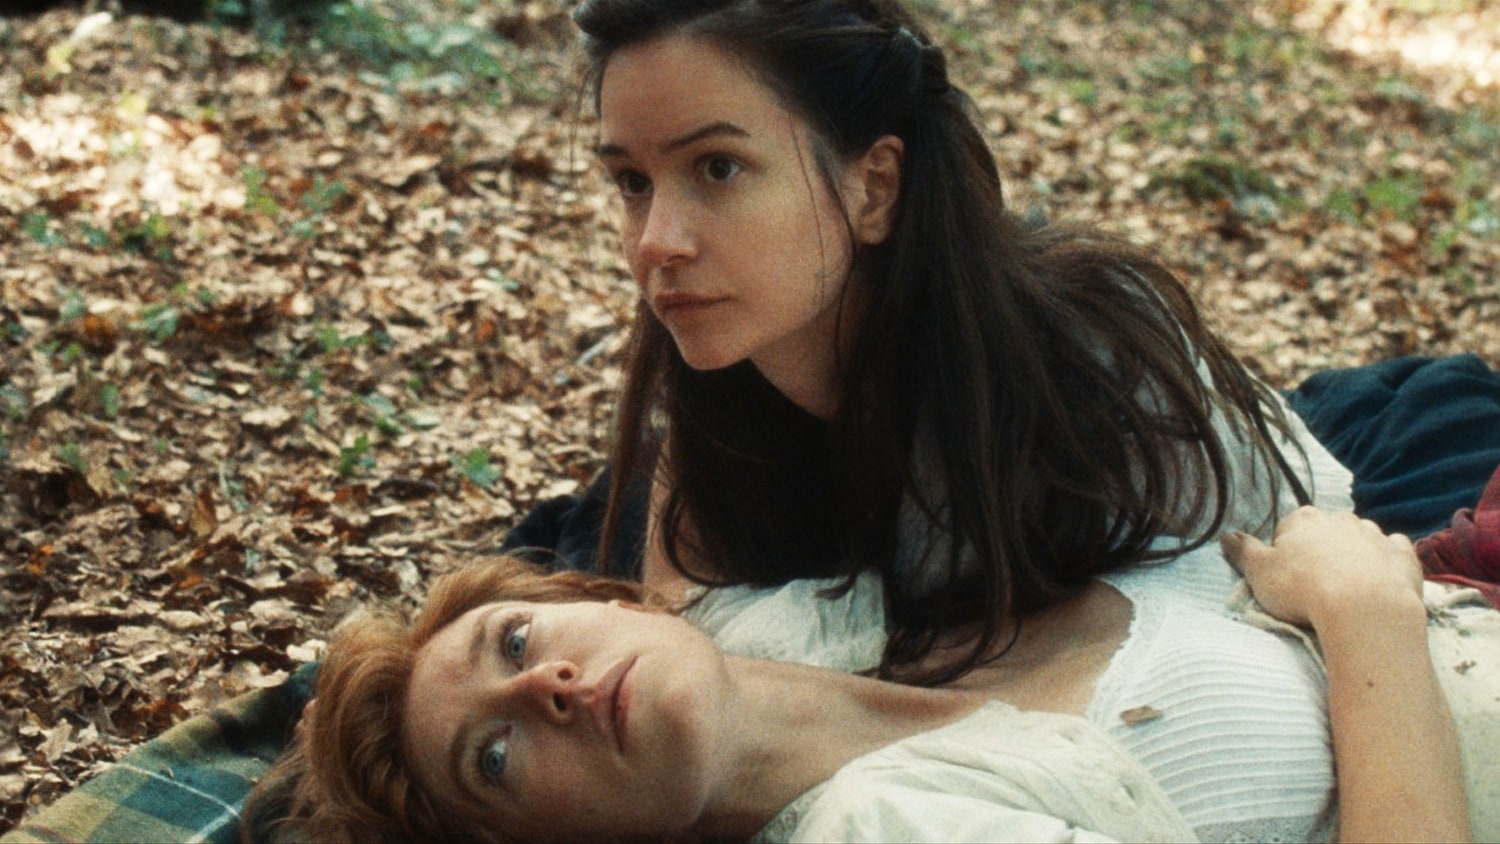 The World to Come star on complexity of portraying a 19th century lesbian romance image